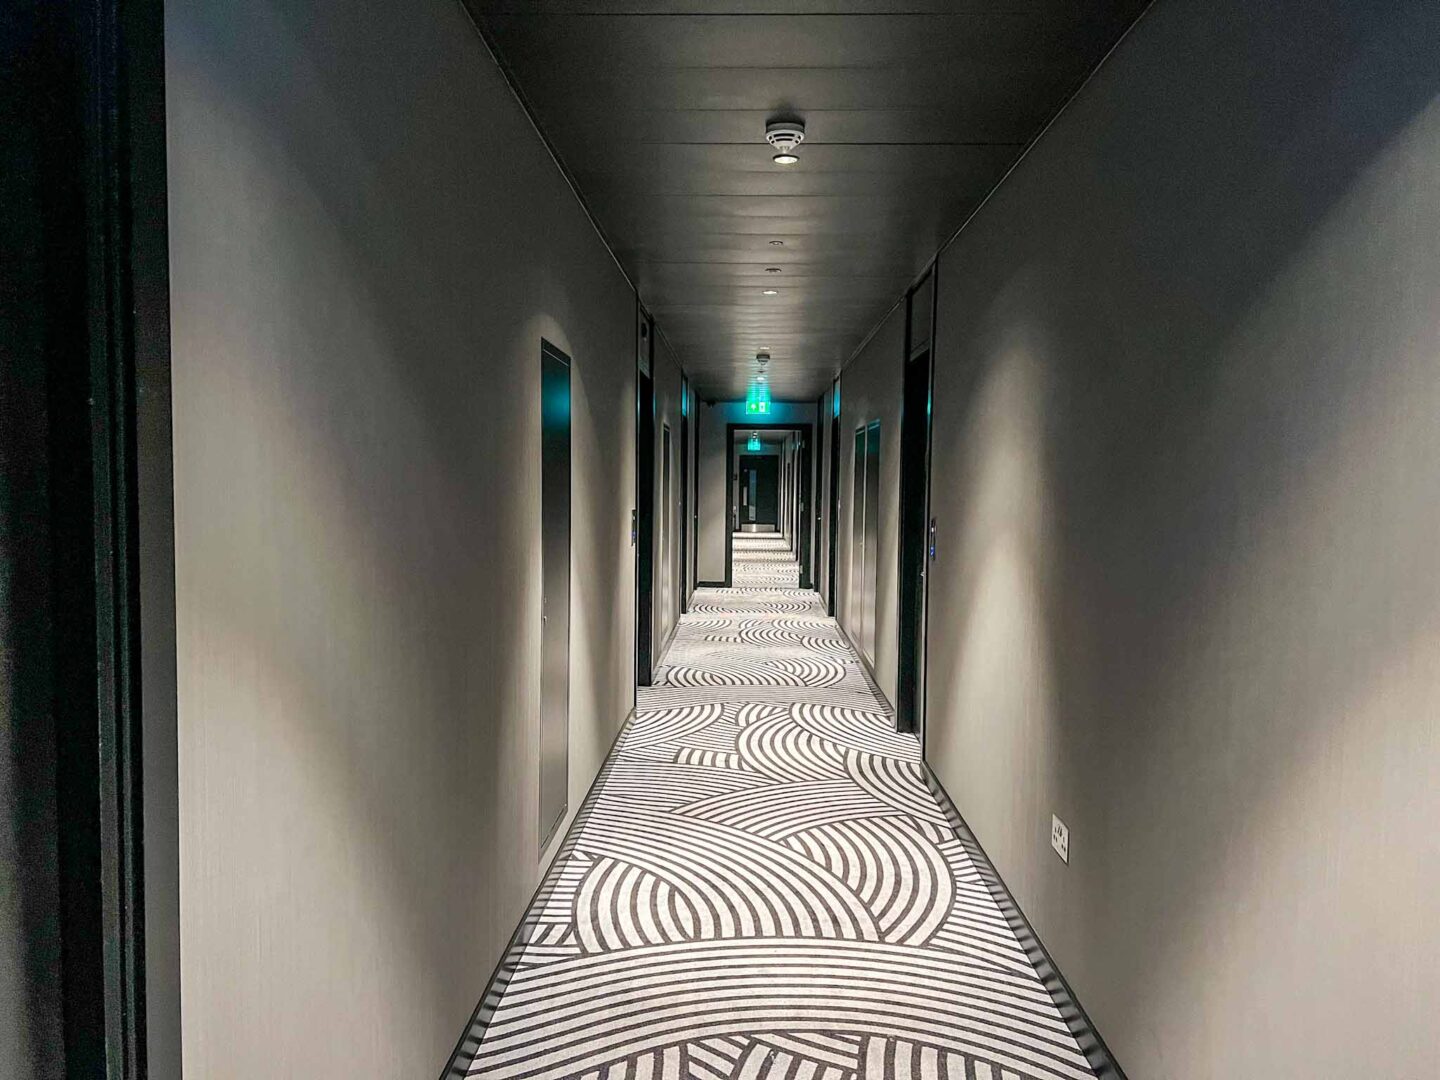 wilde aparthotels manchester, corridor to apartments